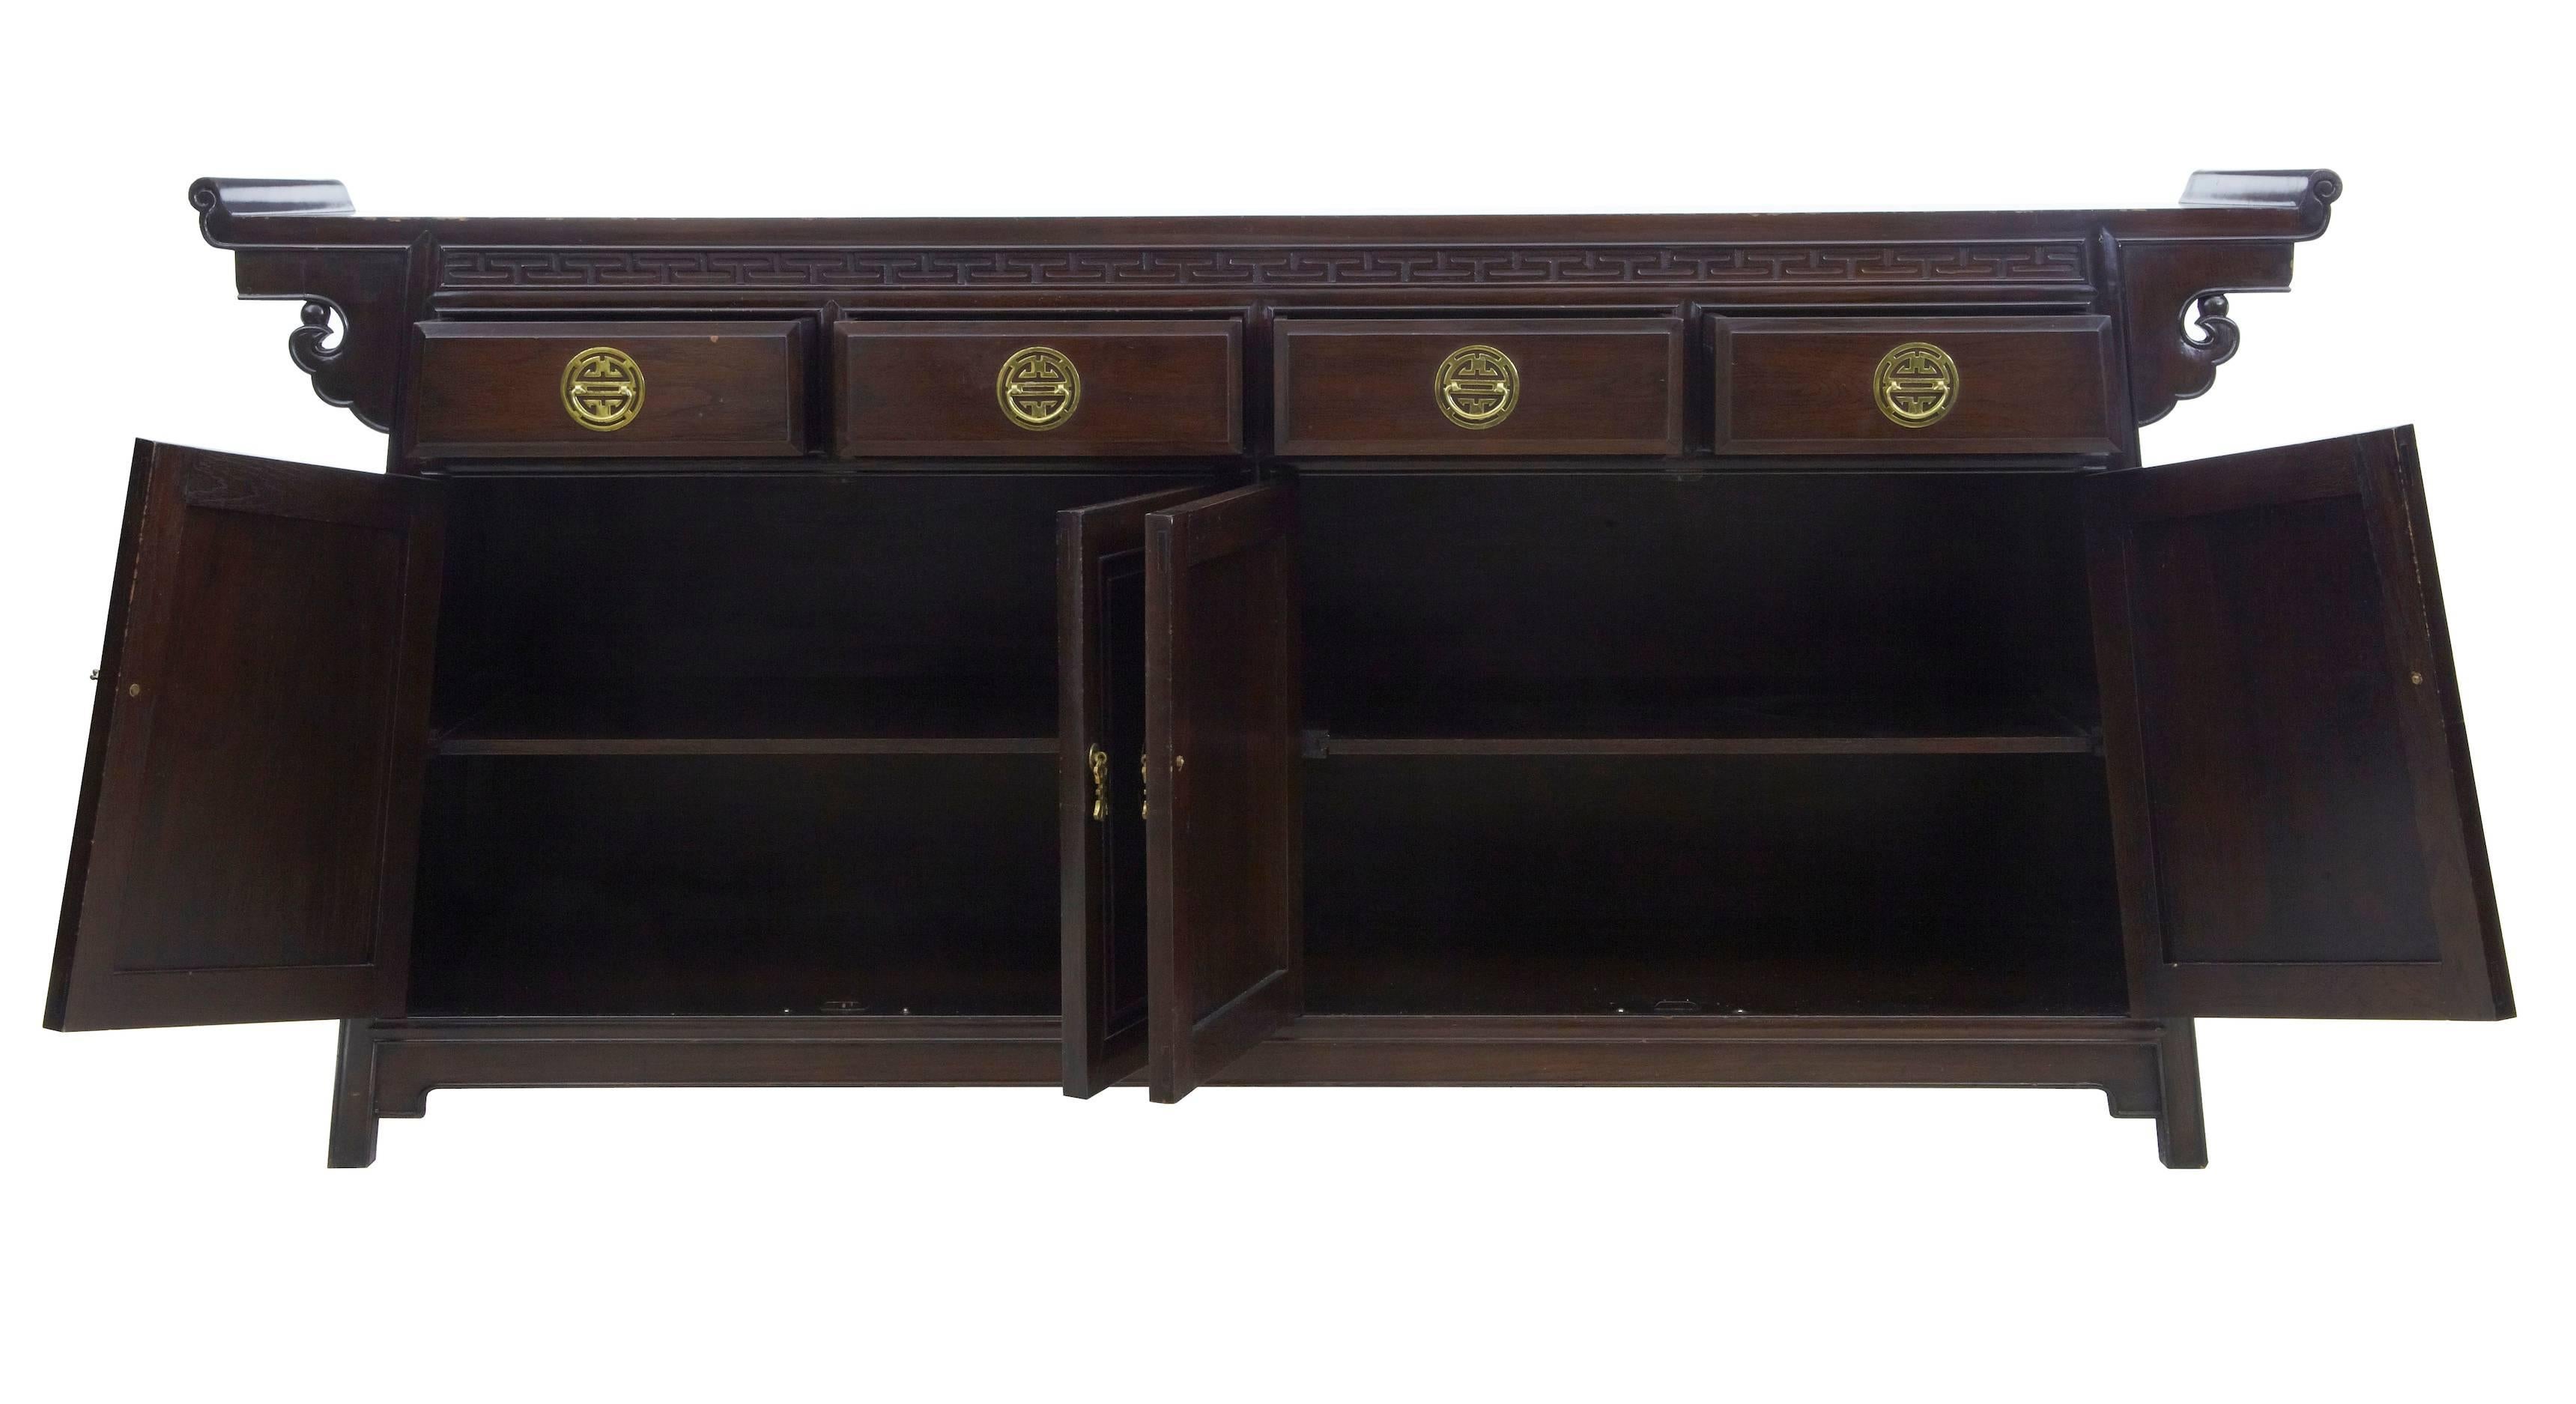 Chinese influenced sideboard, circa 1970.
Typical chinese design, featuring four drawers below which are two double door cupboards each containing one shelf.
Chinese brass hardware.
Light scratches to top and some minor bumps to lacquer